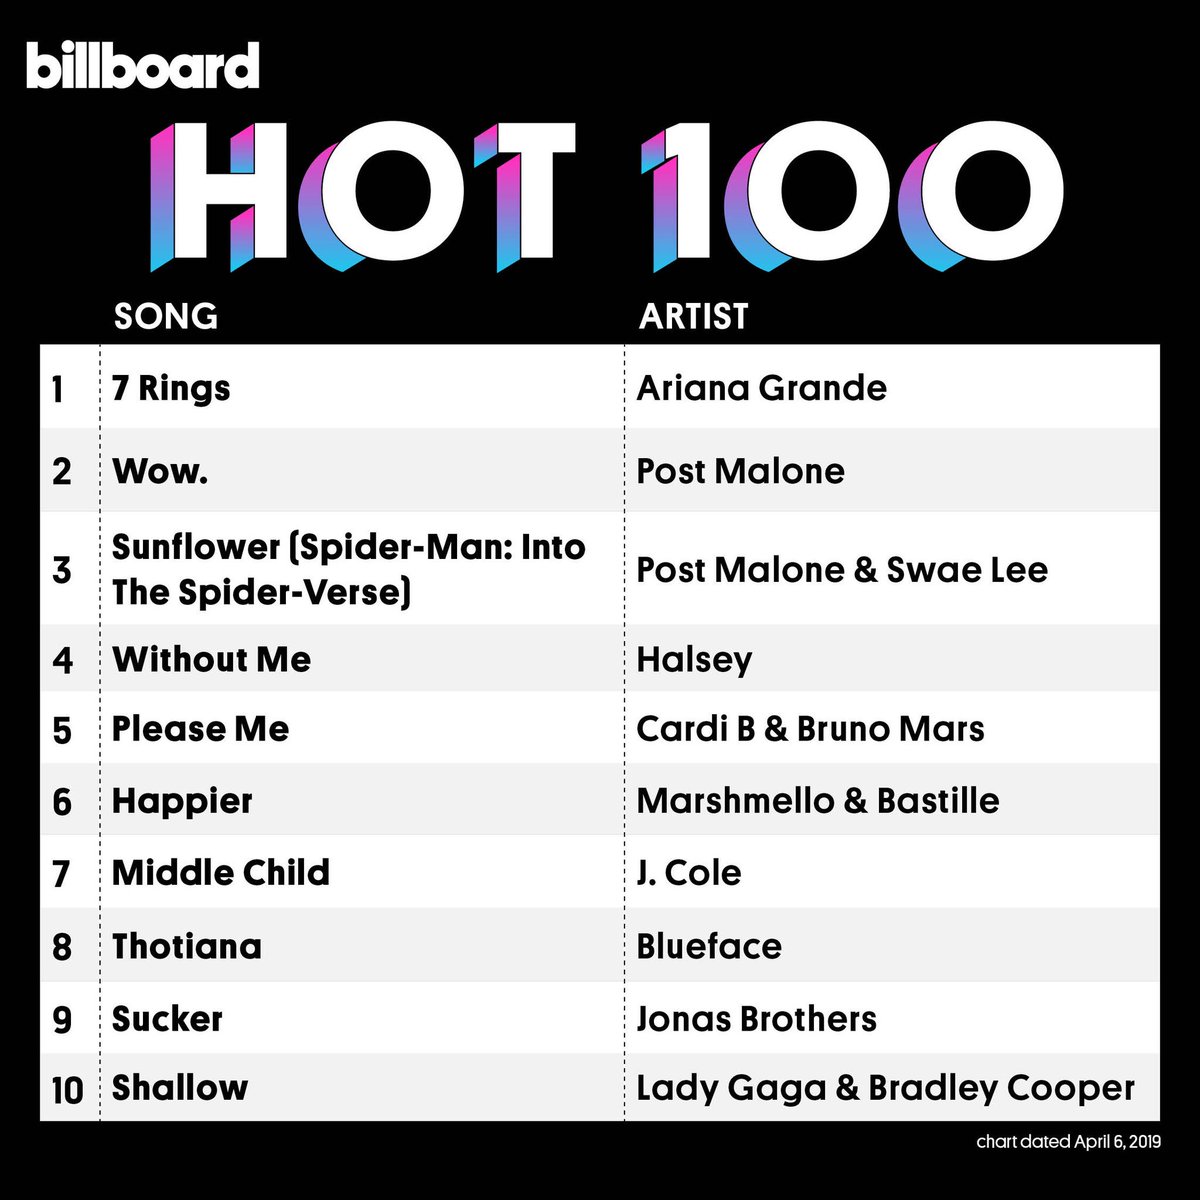 RT @billboardcharts: The #Hot100 top 10 (chart dated April 6, 2019) https://t.co/Z0djmDhZdY